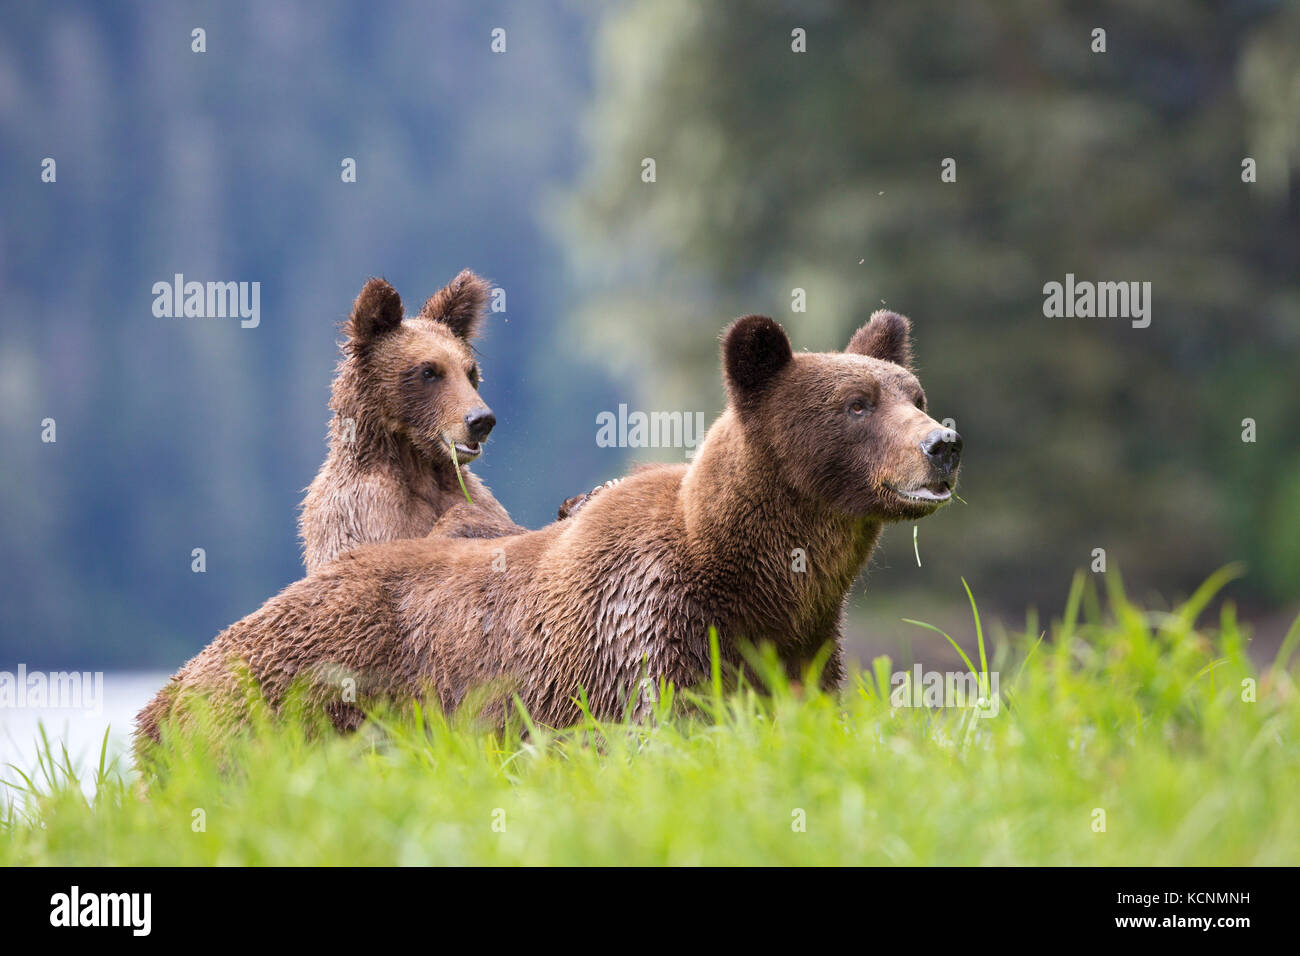 Grizzly bear (Ursus arctos horriblis), female and yearling cub with paws on female's back,  eating Lyngbye's sedge (Carex lyngbyei), Khutzeymateen Grizzly Bear Sanctuary, British Columbia, Canada. Stock Photo